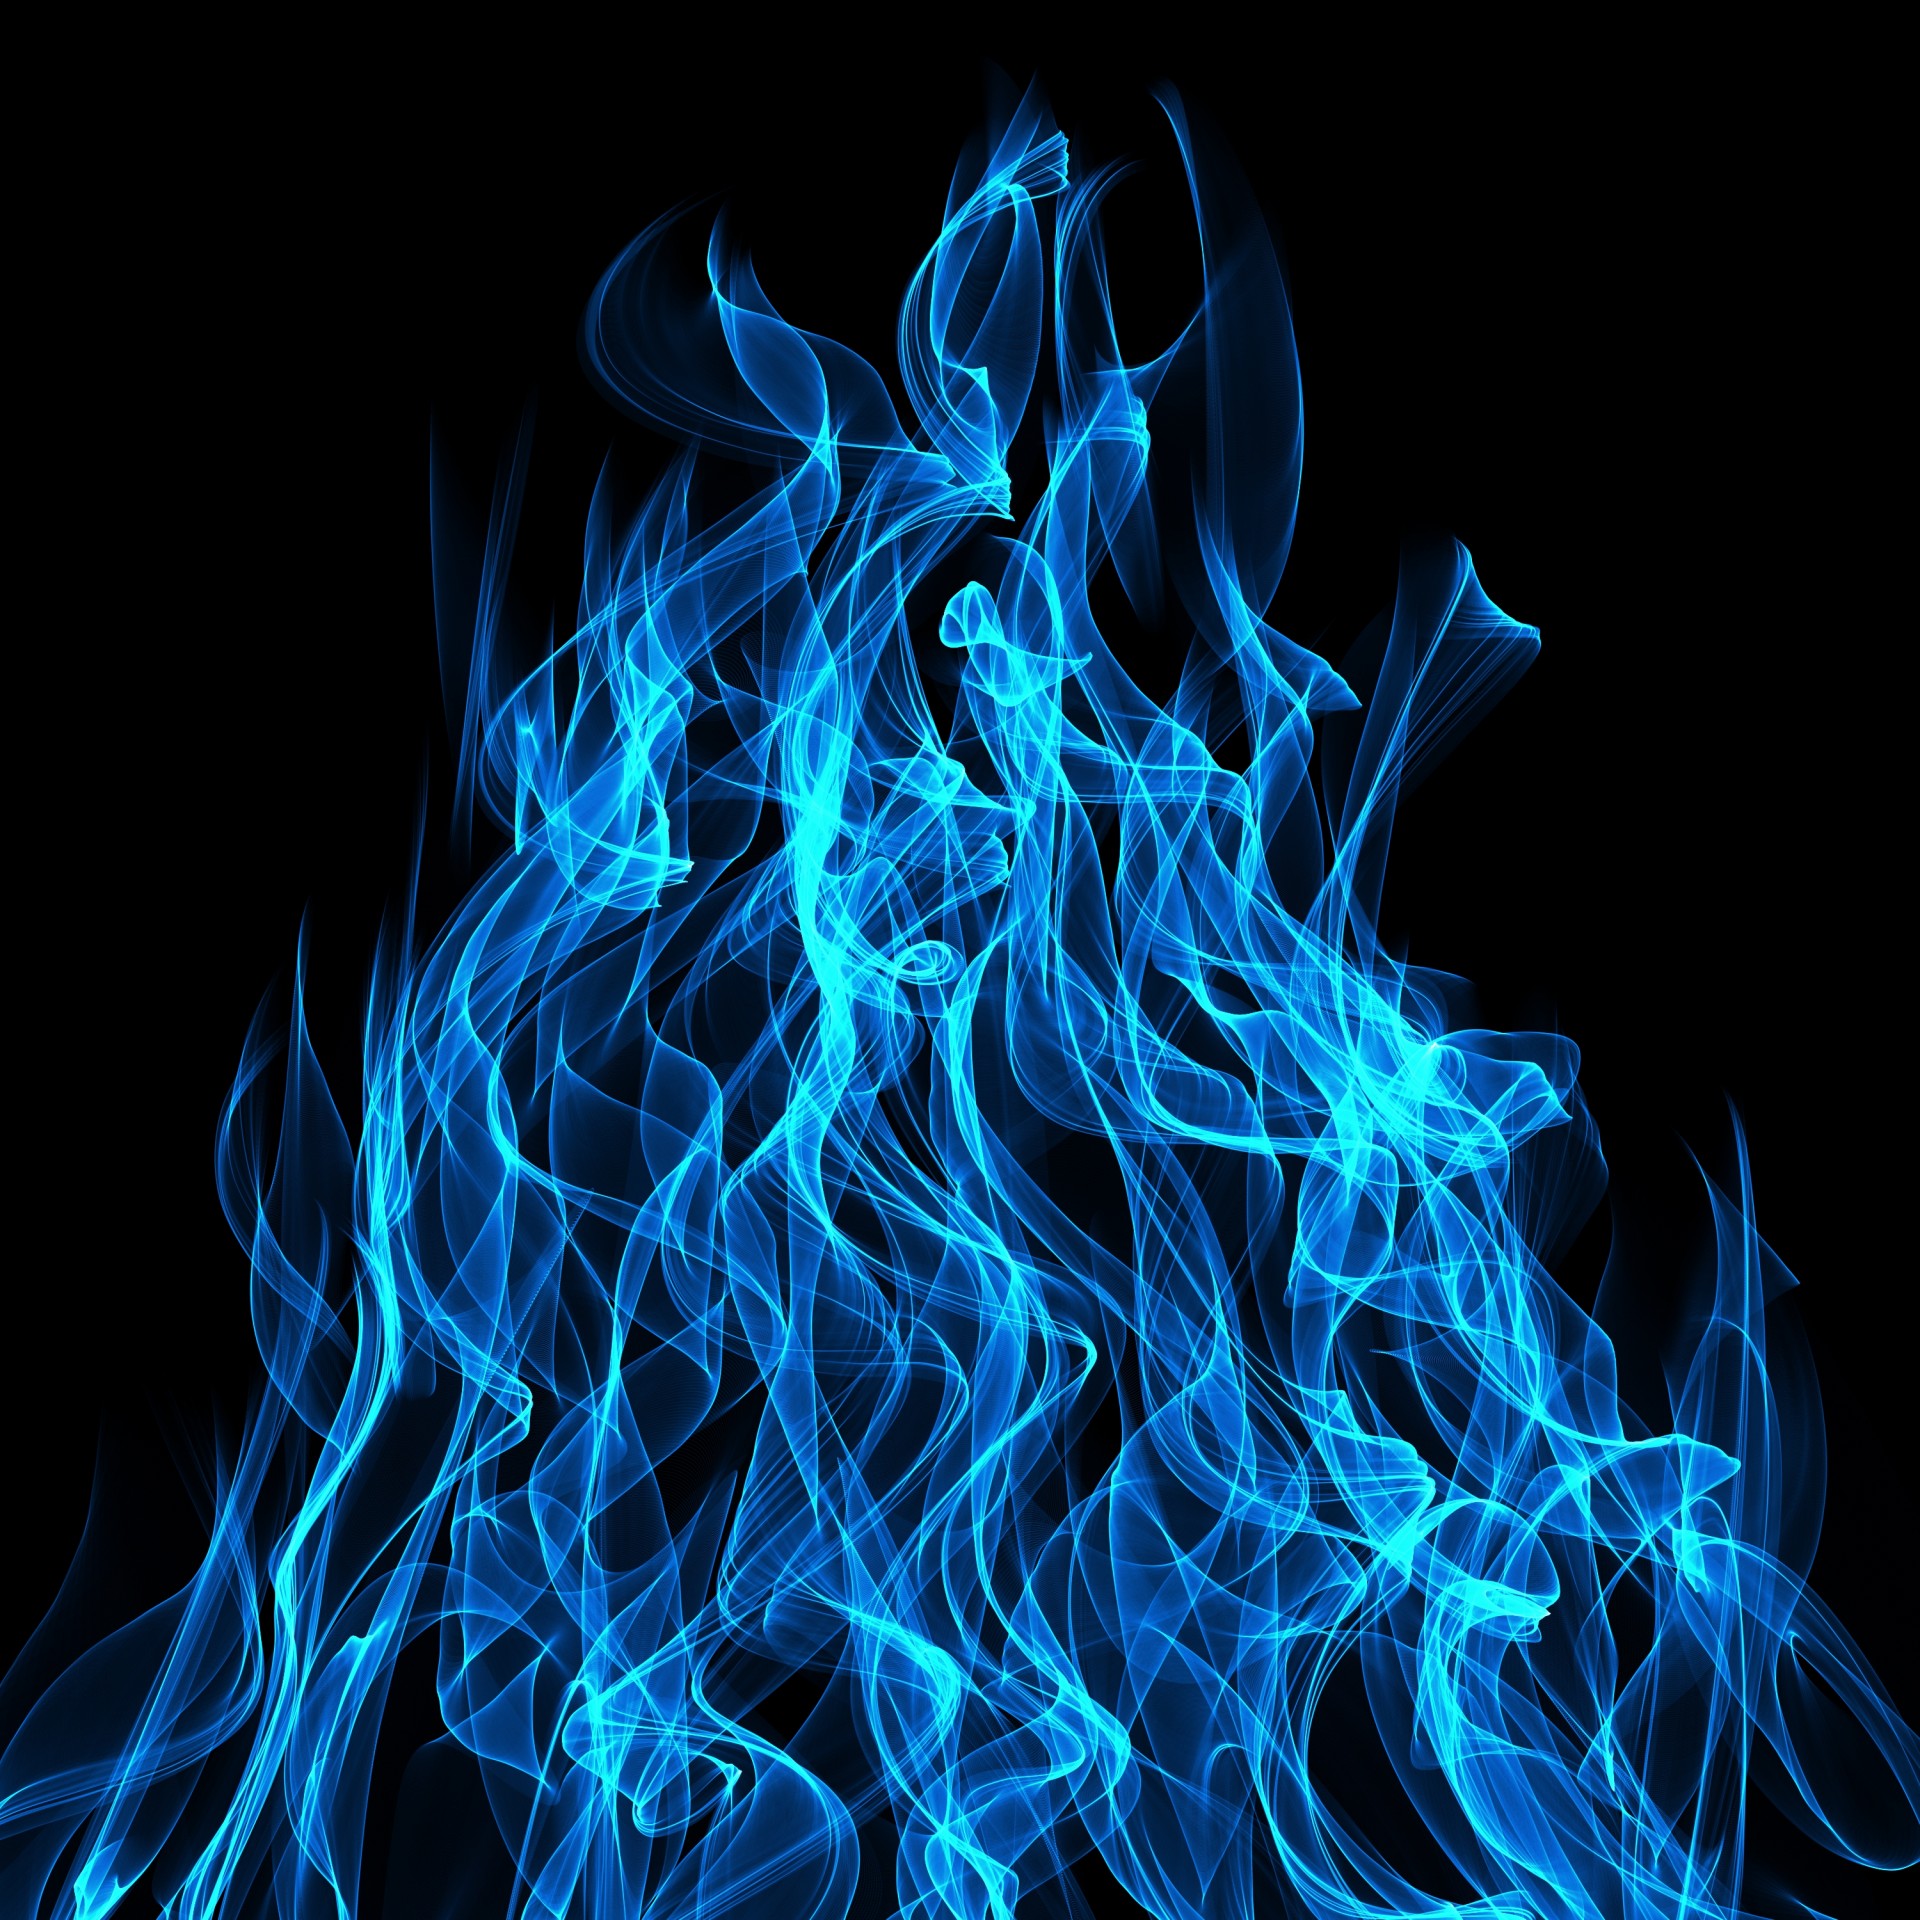 Blue Flames of Fire